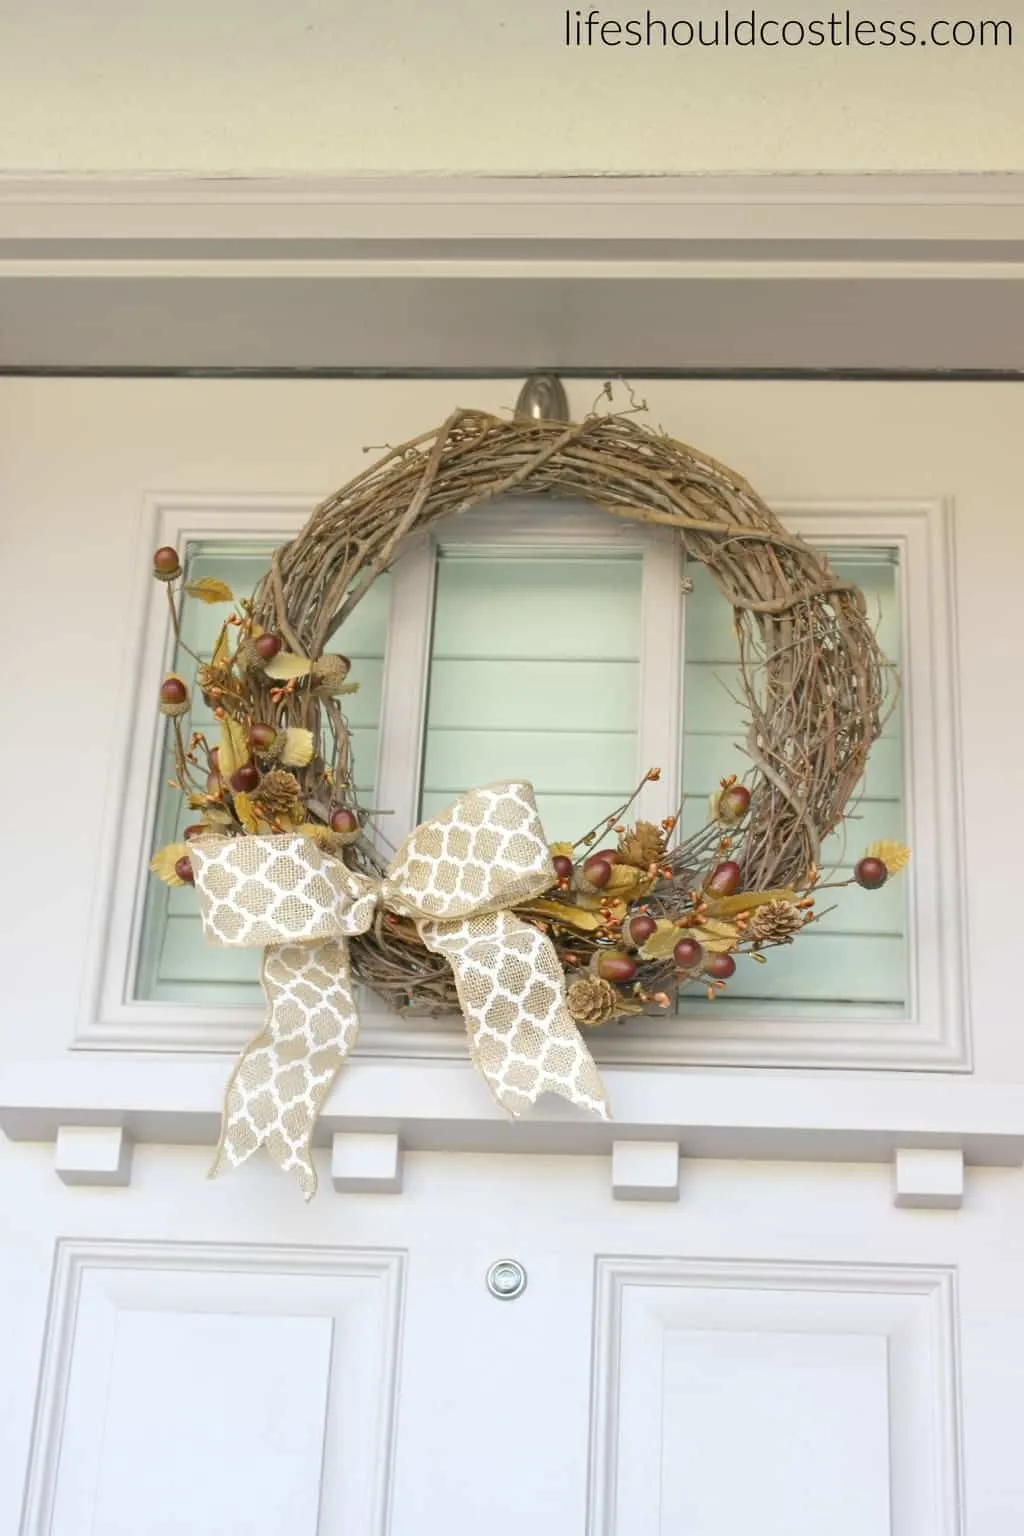 Rustic fall porch decor reveal. See this post and many more popular decor pins at lifeshouldcostless.com. Simple fall wreath.